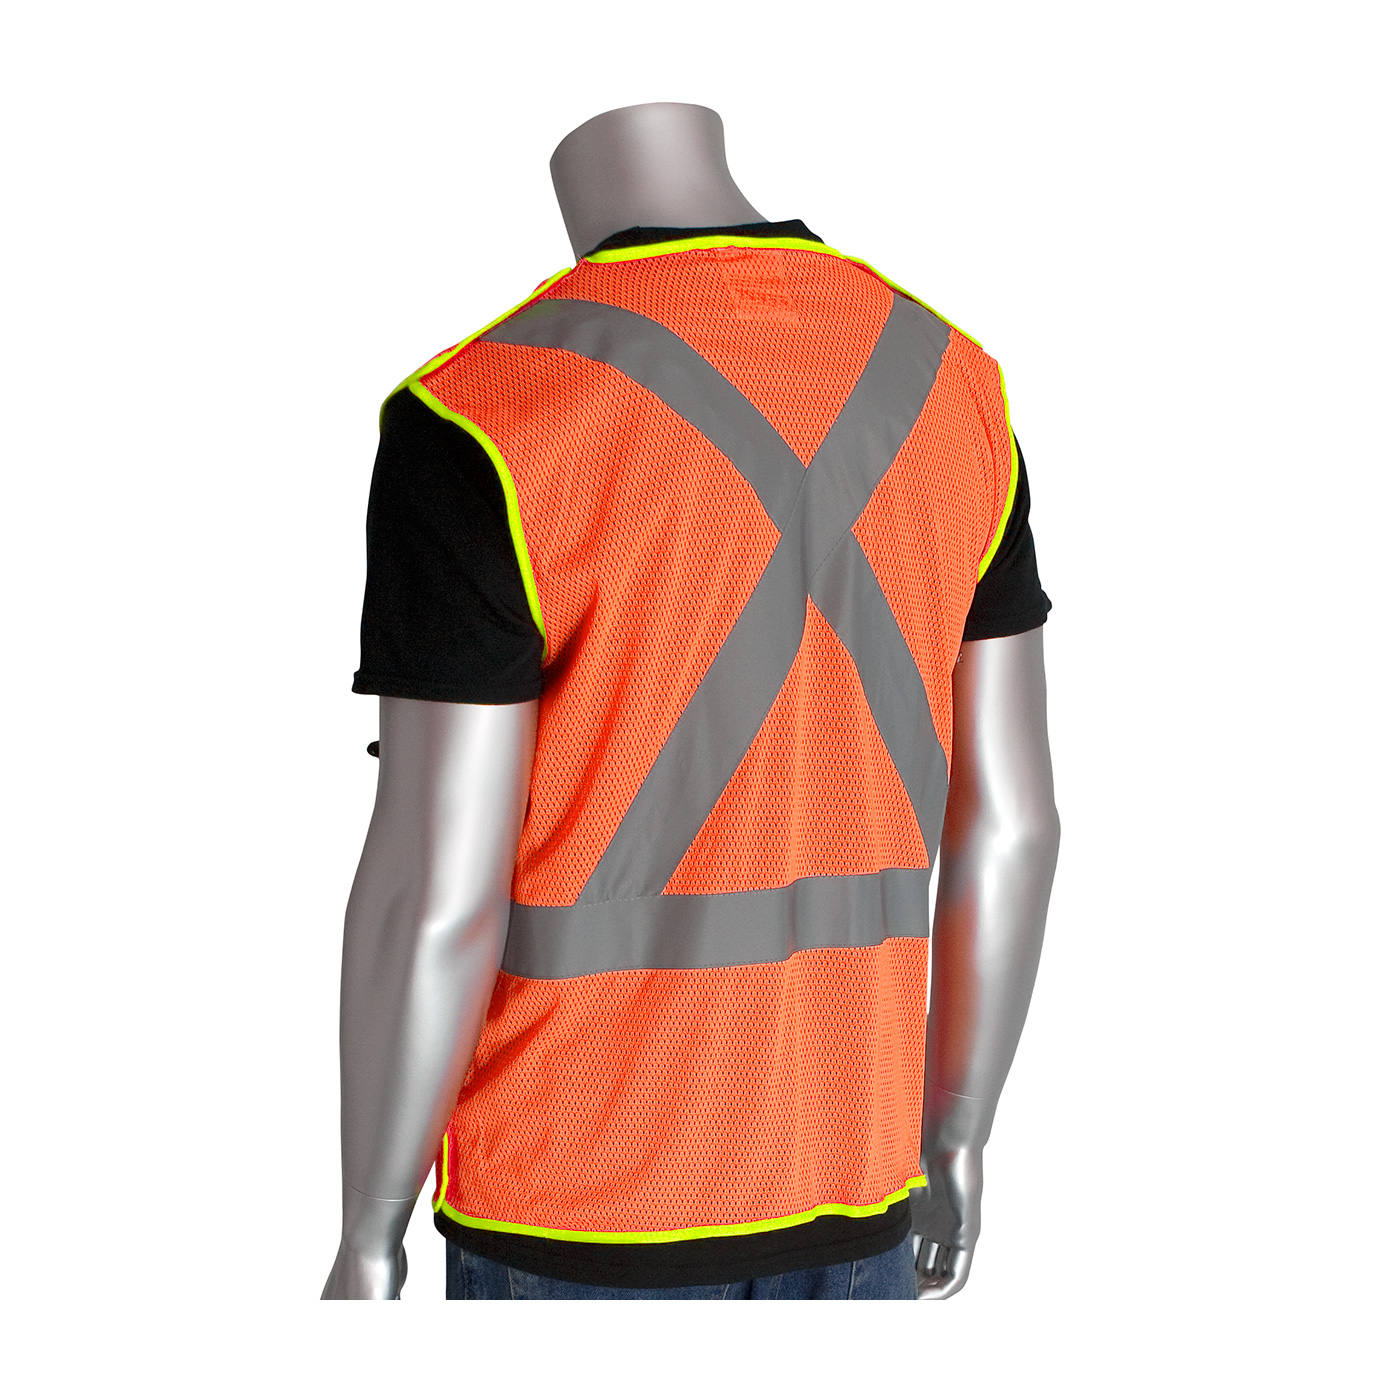 PIP® ANSI Type R Class 2 and CAN/CSA Z96 X-Back Breakaway Mesh Vest #302-0210-OR